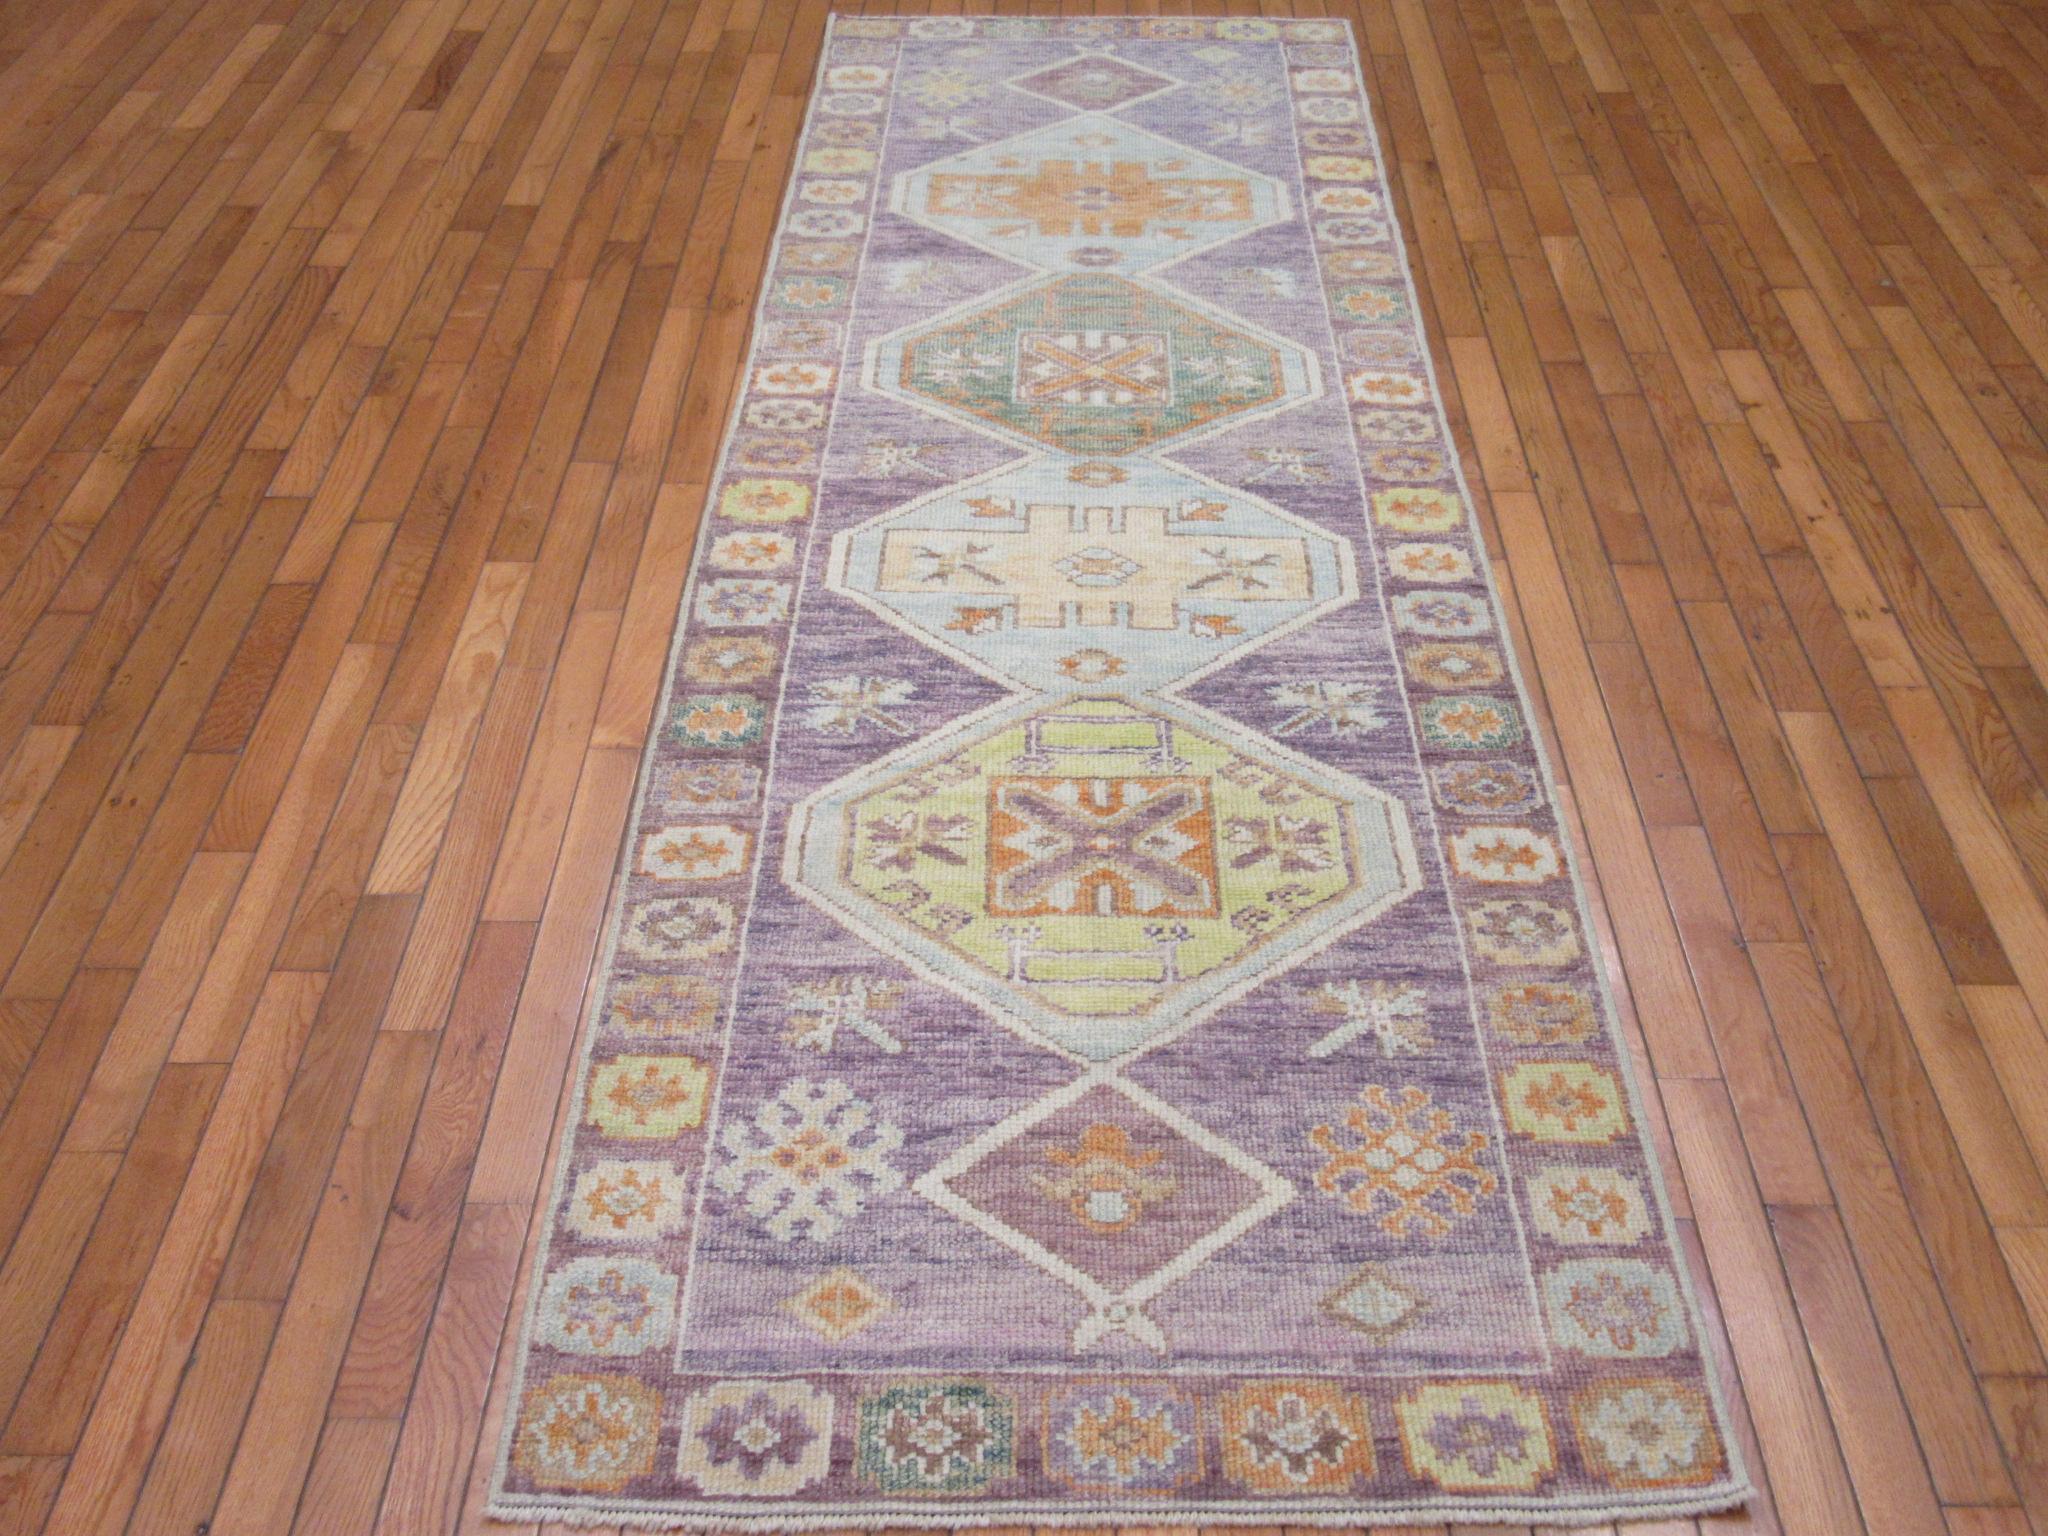 This is a new hand knotted runner rug from Turkey. It is made with durable Turkish wool in traditional geometric multi medallion Anatolian design. It has the rich updated joyful colors bringing life to any spot or hall. It measures 2' 11'' x 9' 2''